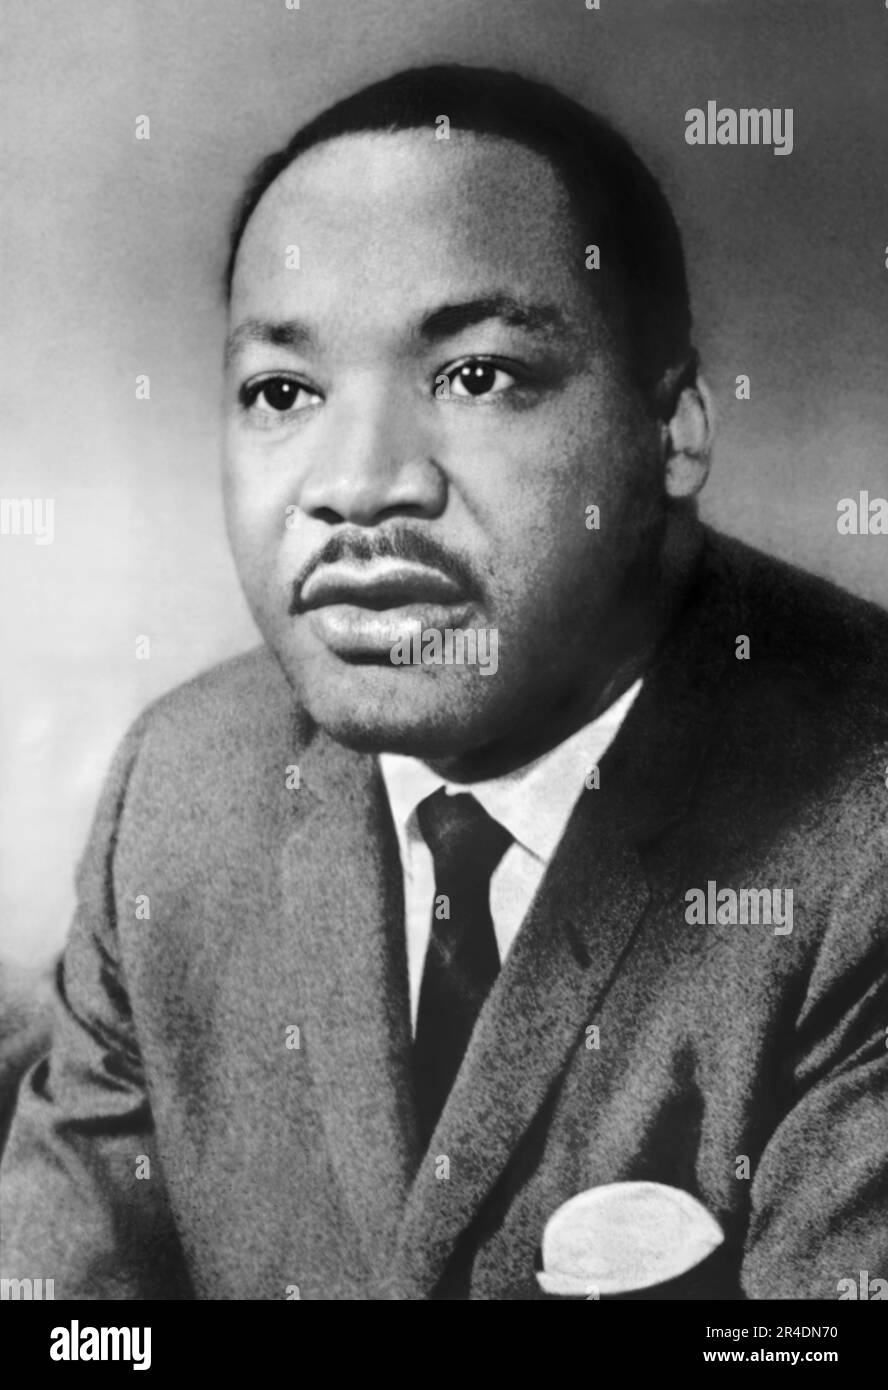 Portrait of civil rights leader Dr. Martin Luther King, Jr. Stock Photo